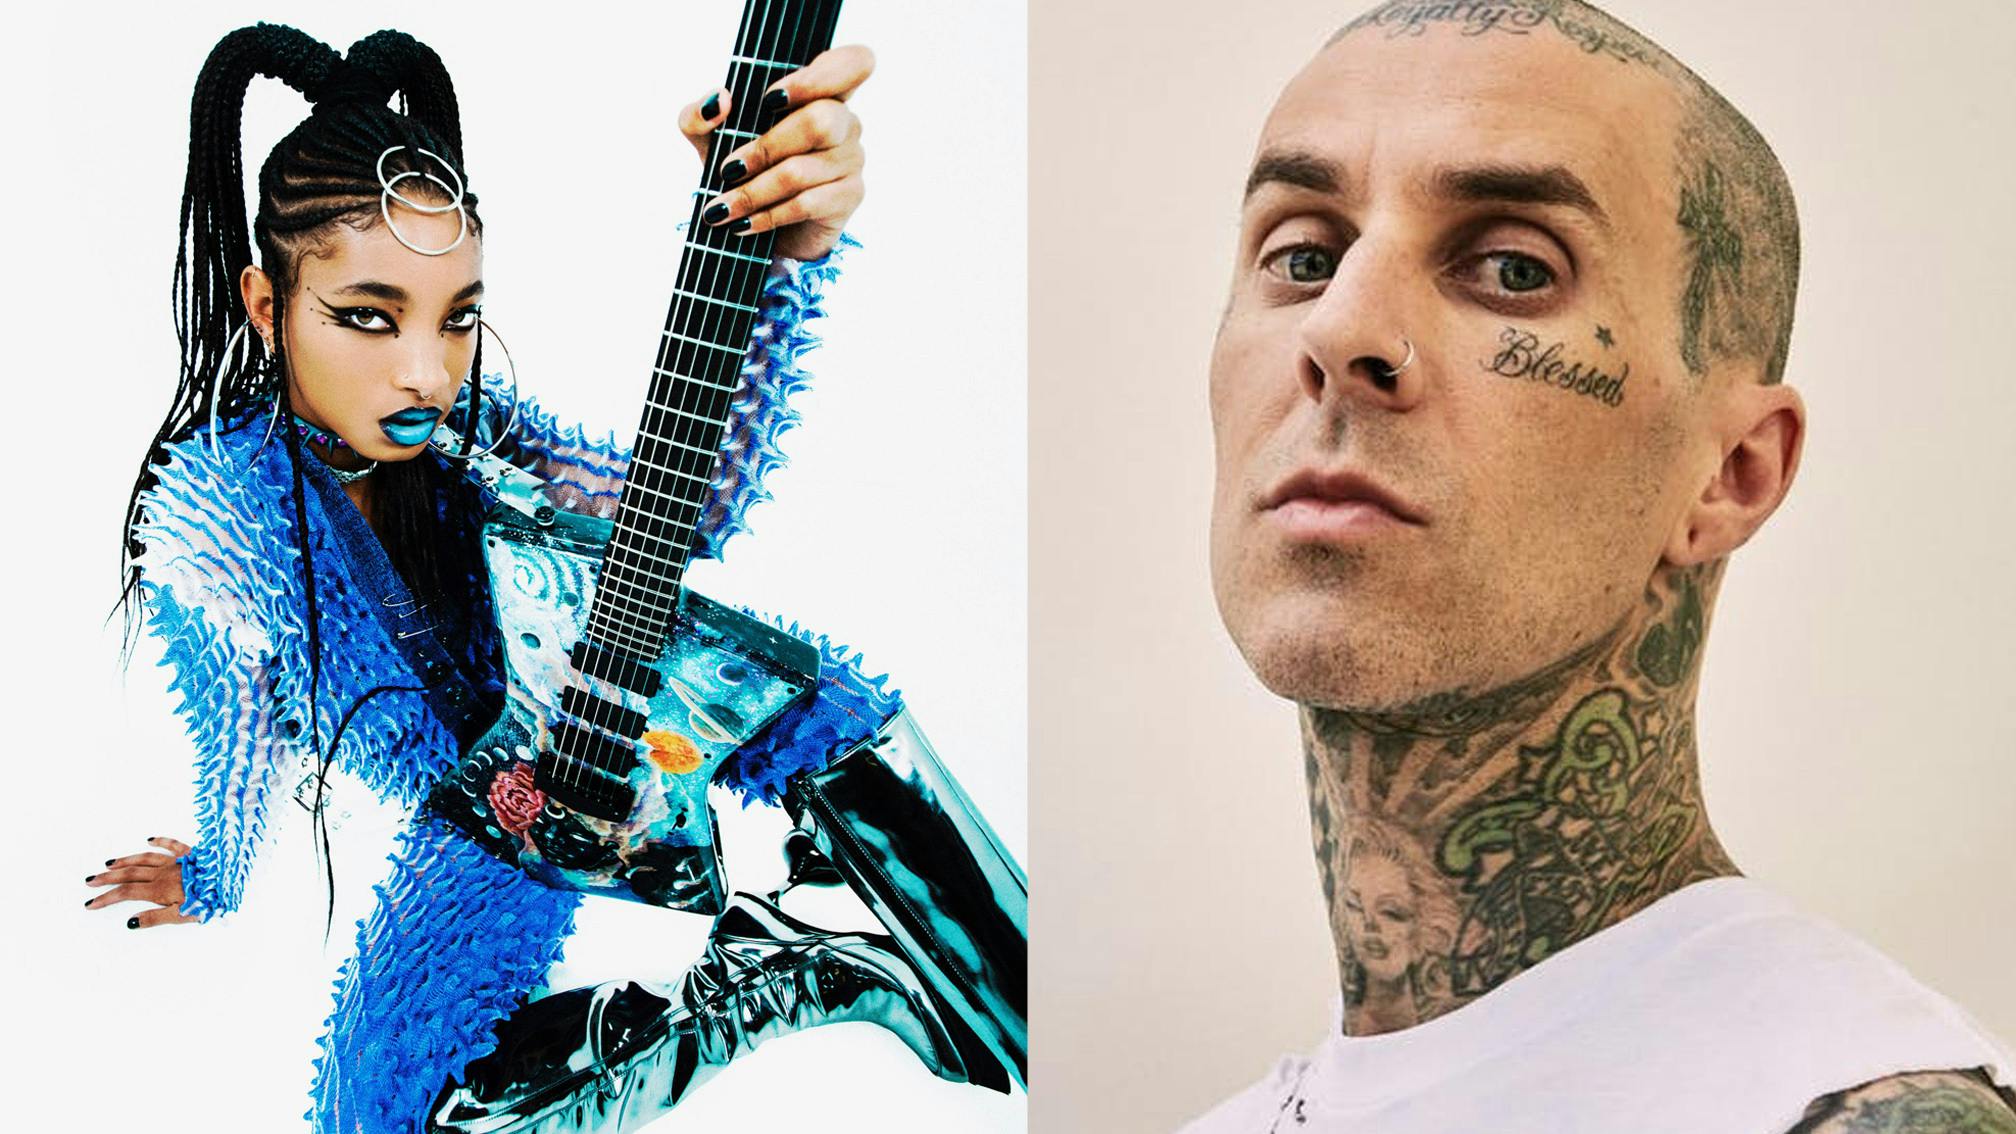 Willow Smith drops new pop-punk collab with blink-182's Travis Barker